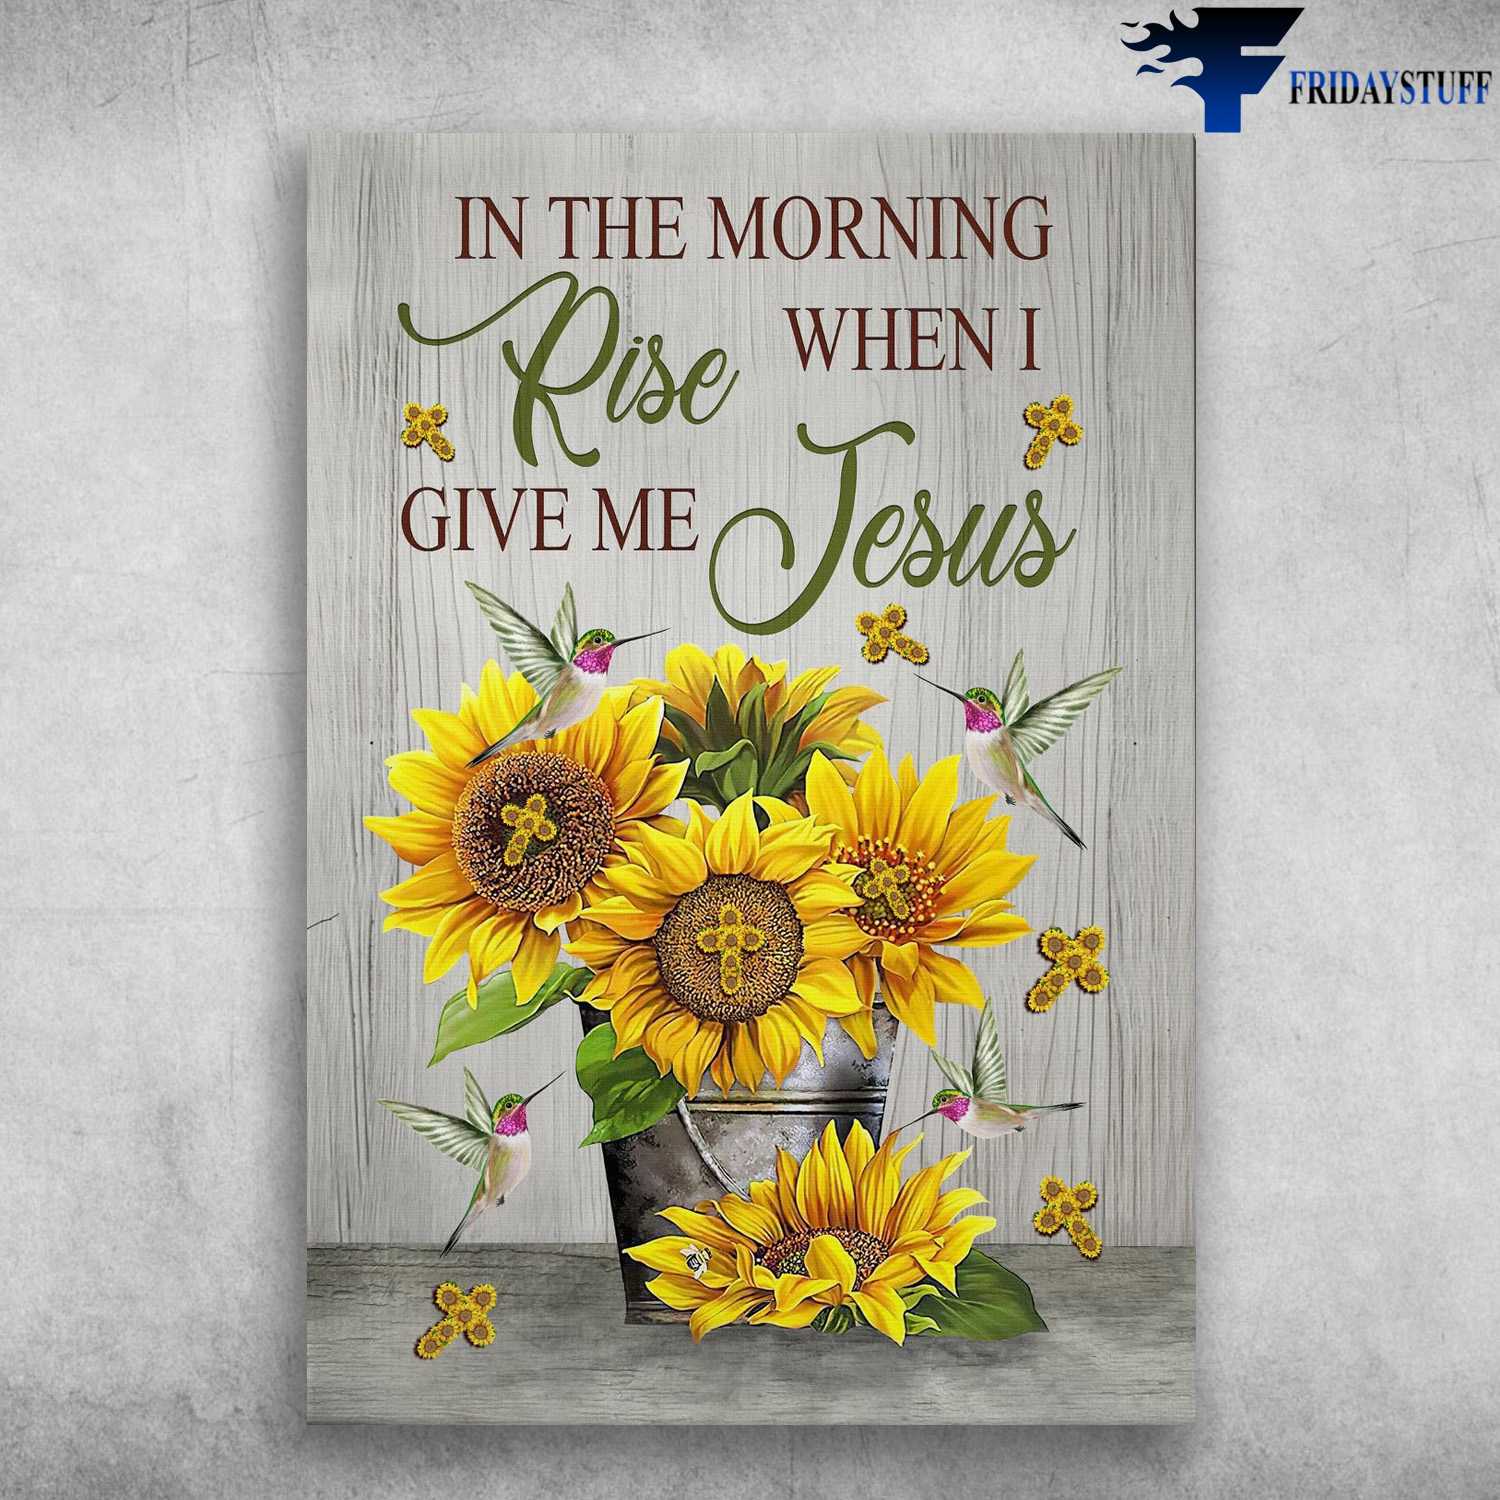 Hummingbird Sunflower - In The Morning, Ride When I Give Me Jesus